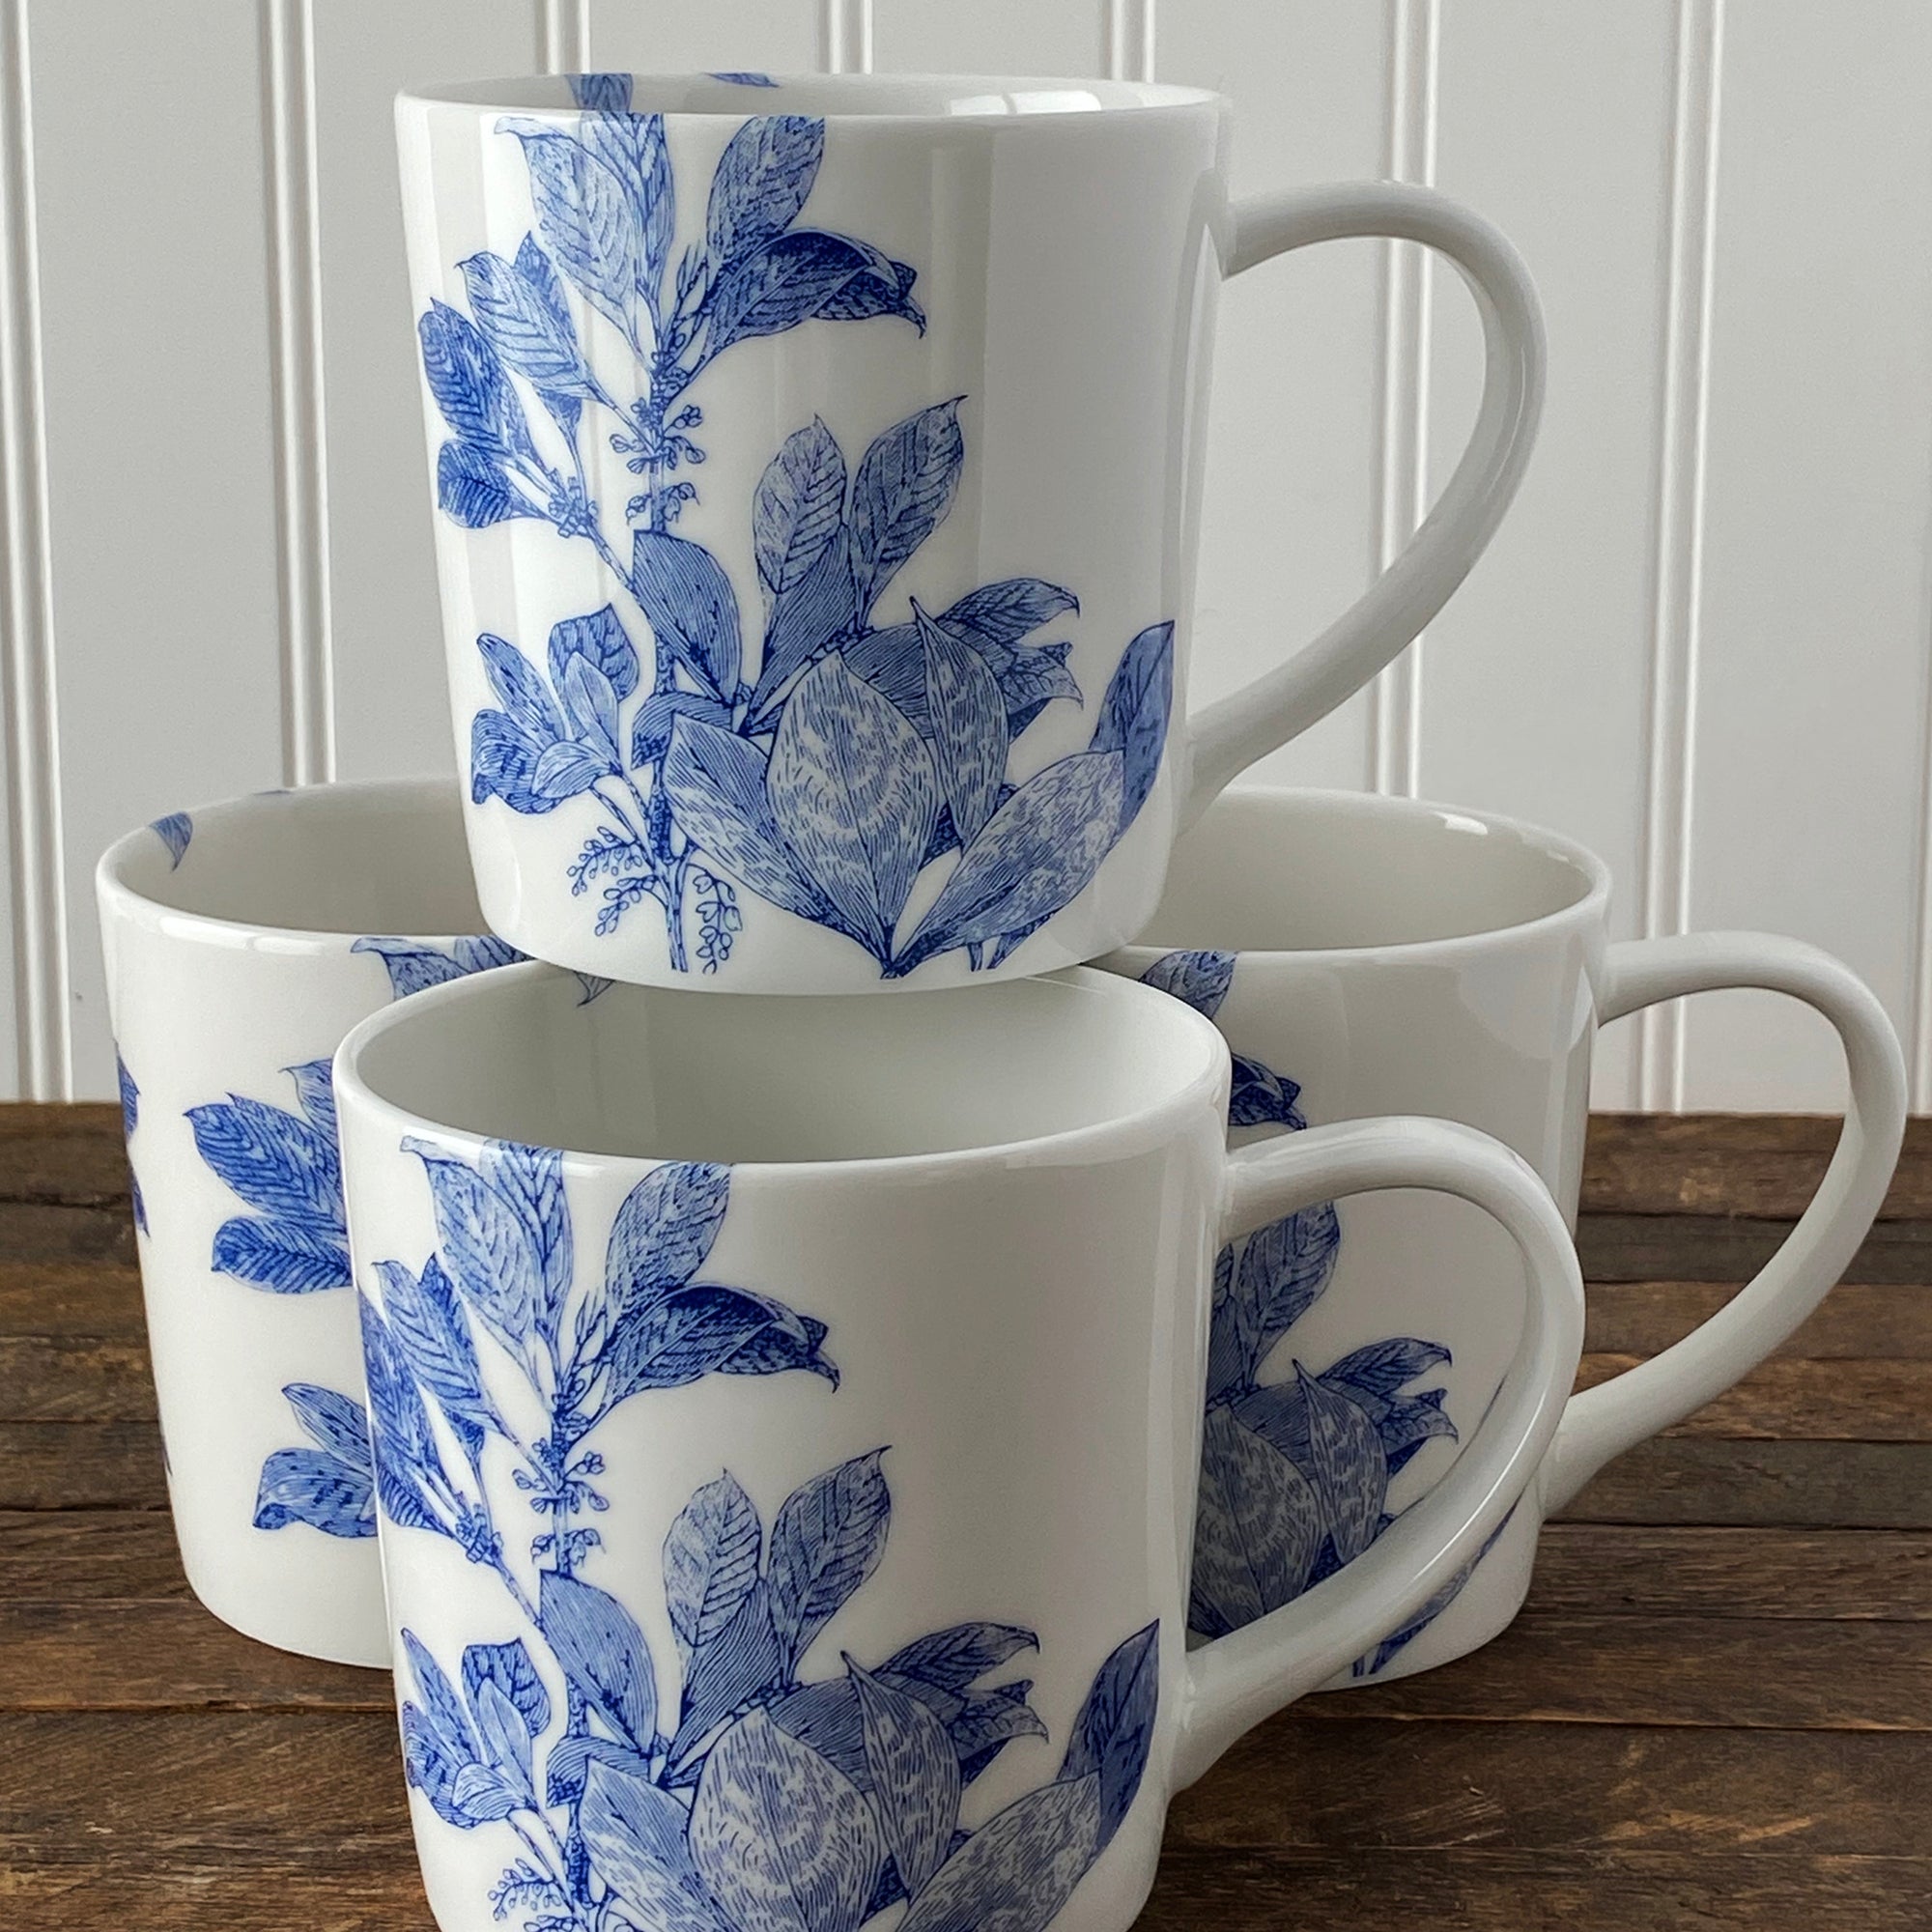 Four blue and white mugs on a wooden table.